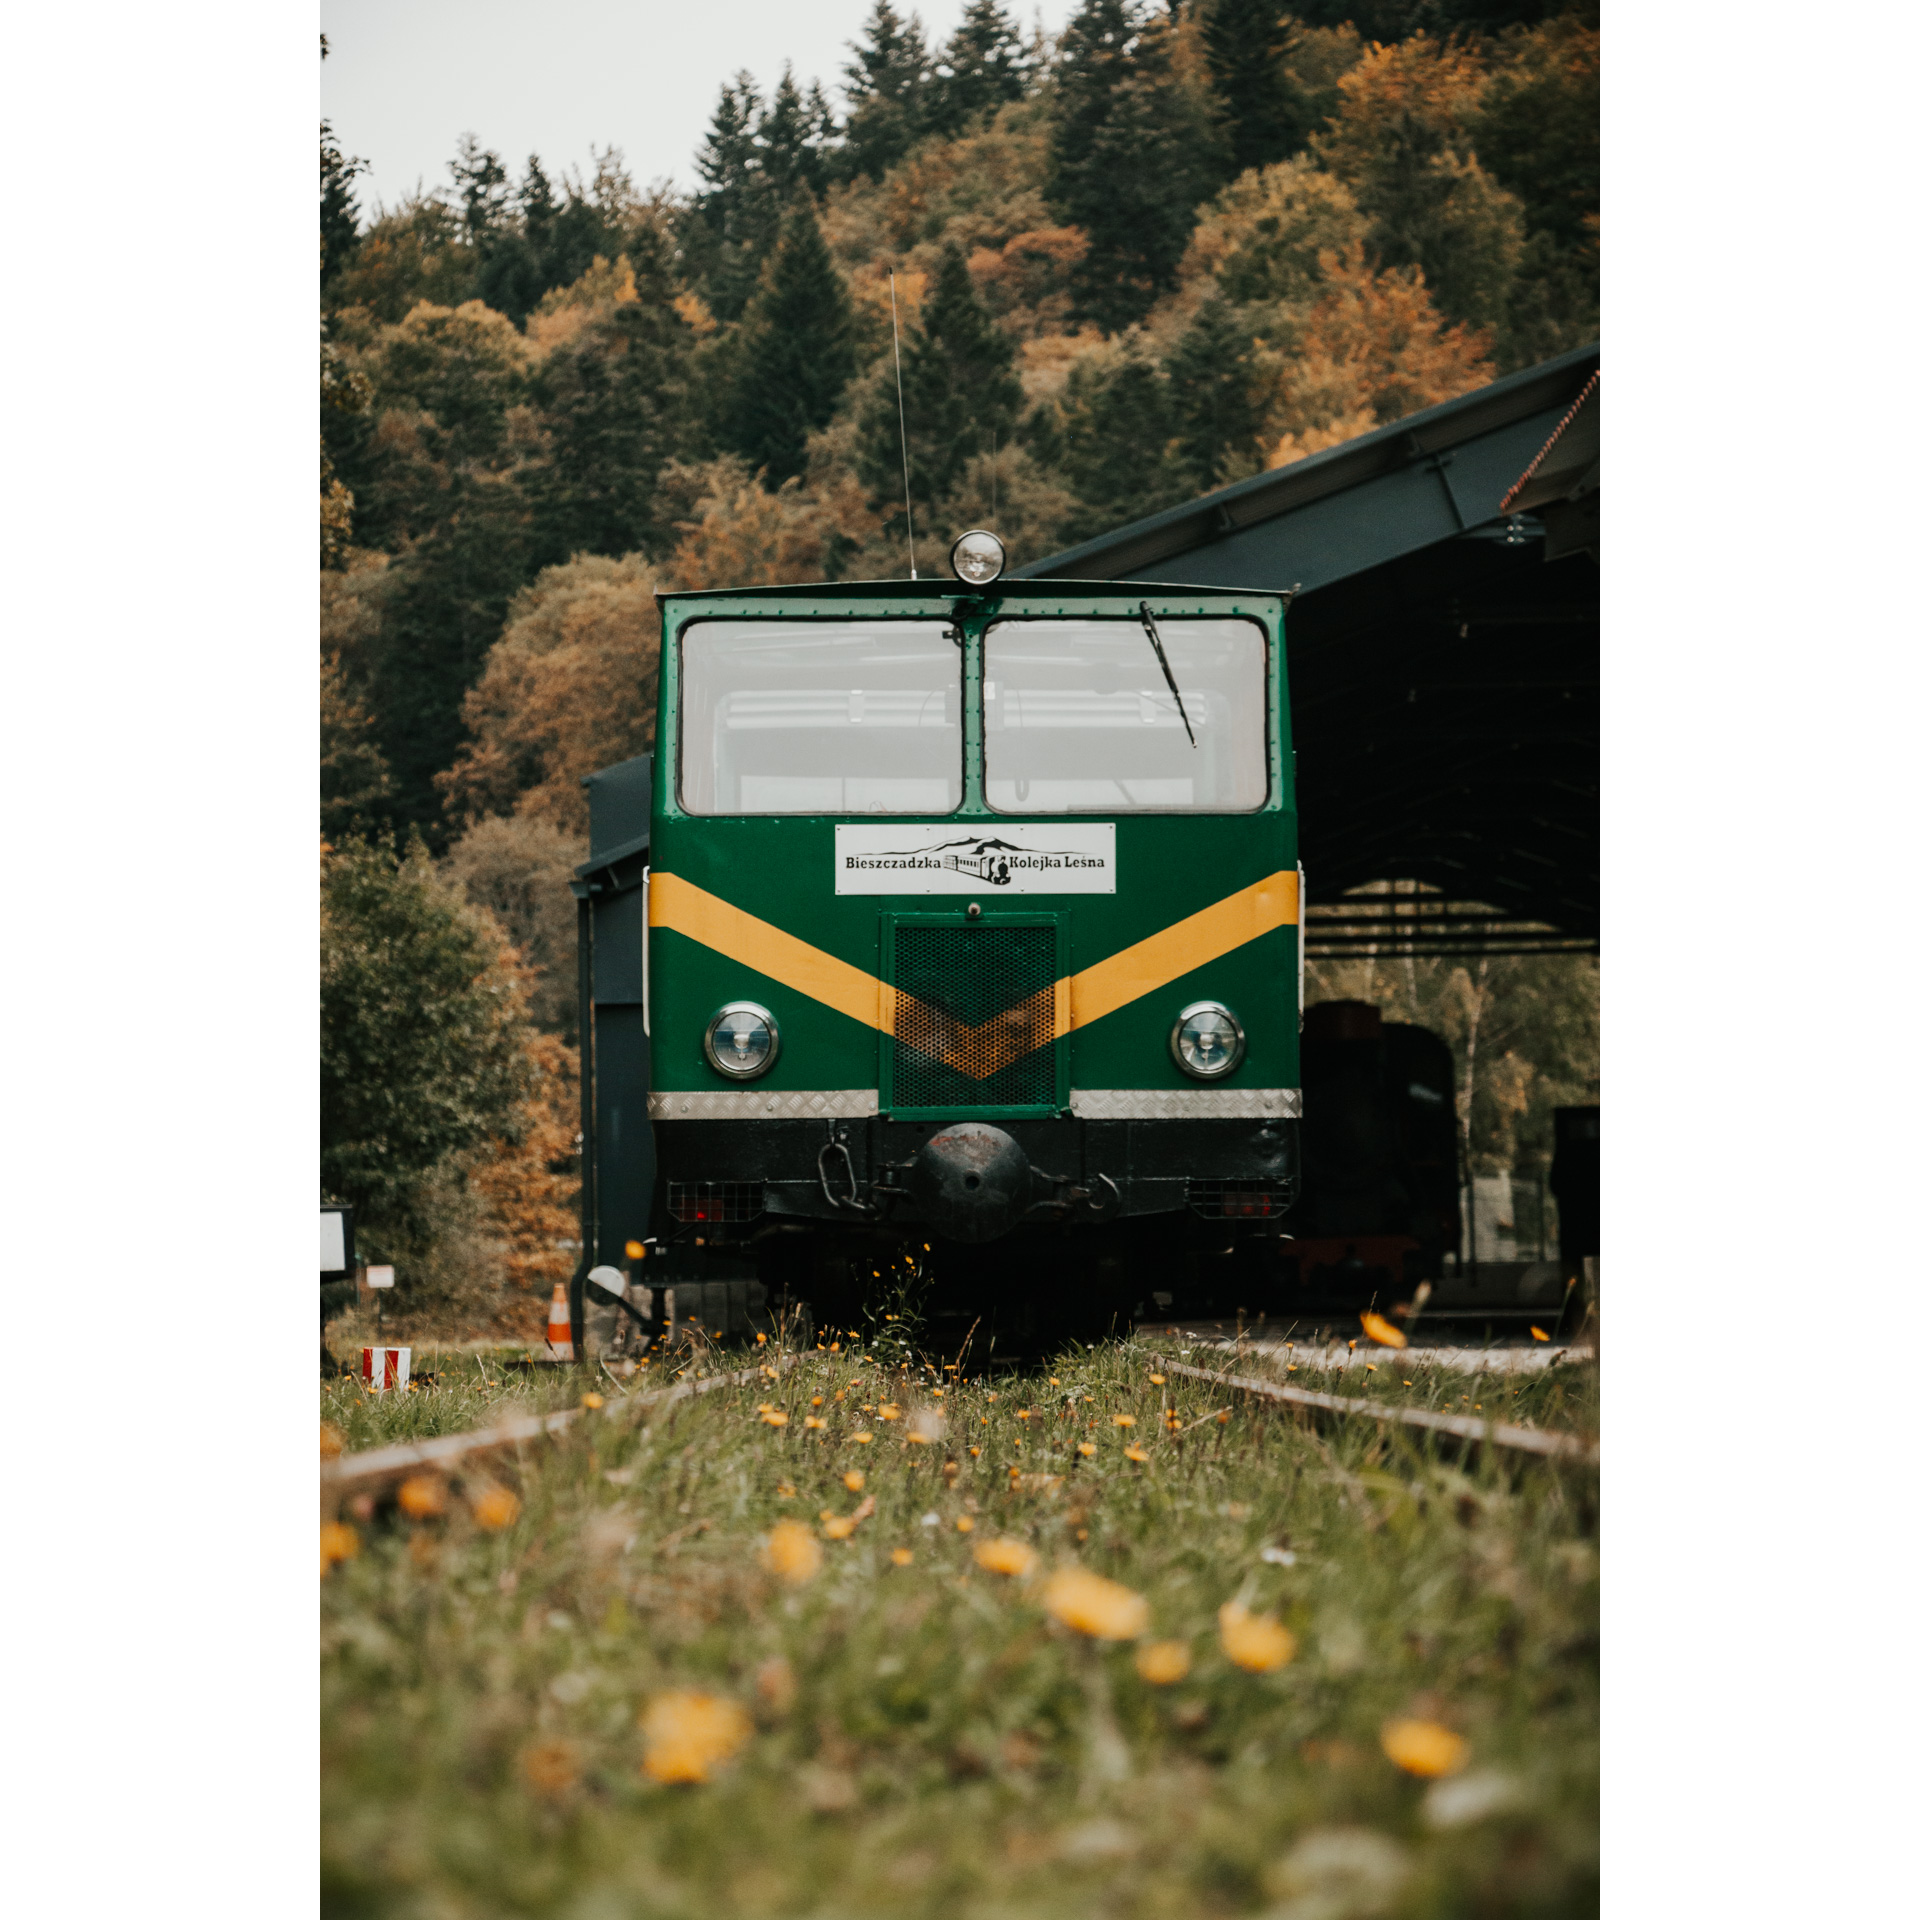 The front of a dark green forest railway with a triangular yellow band in the middle